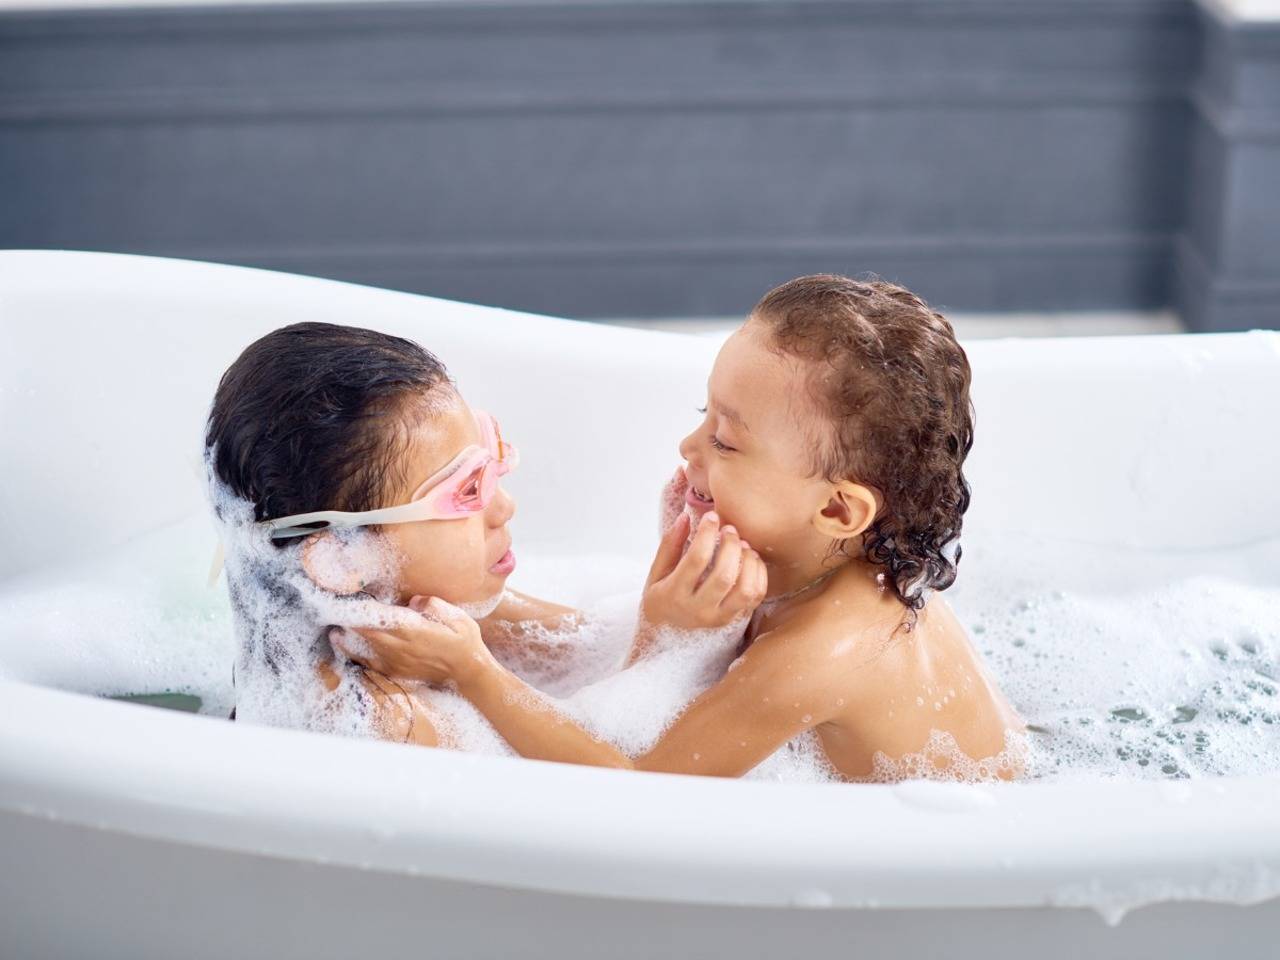 What is the right age for kids to stop bathing together? pic